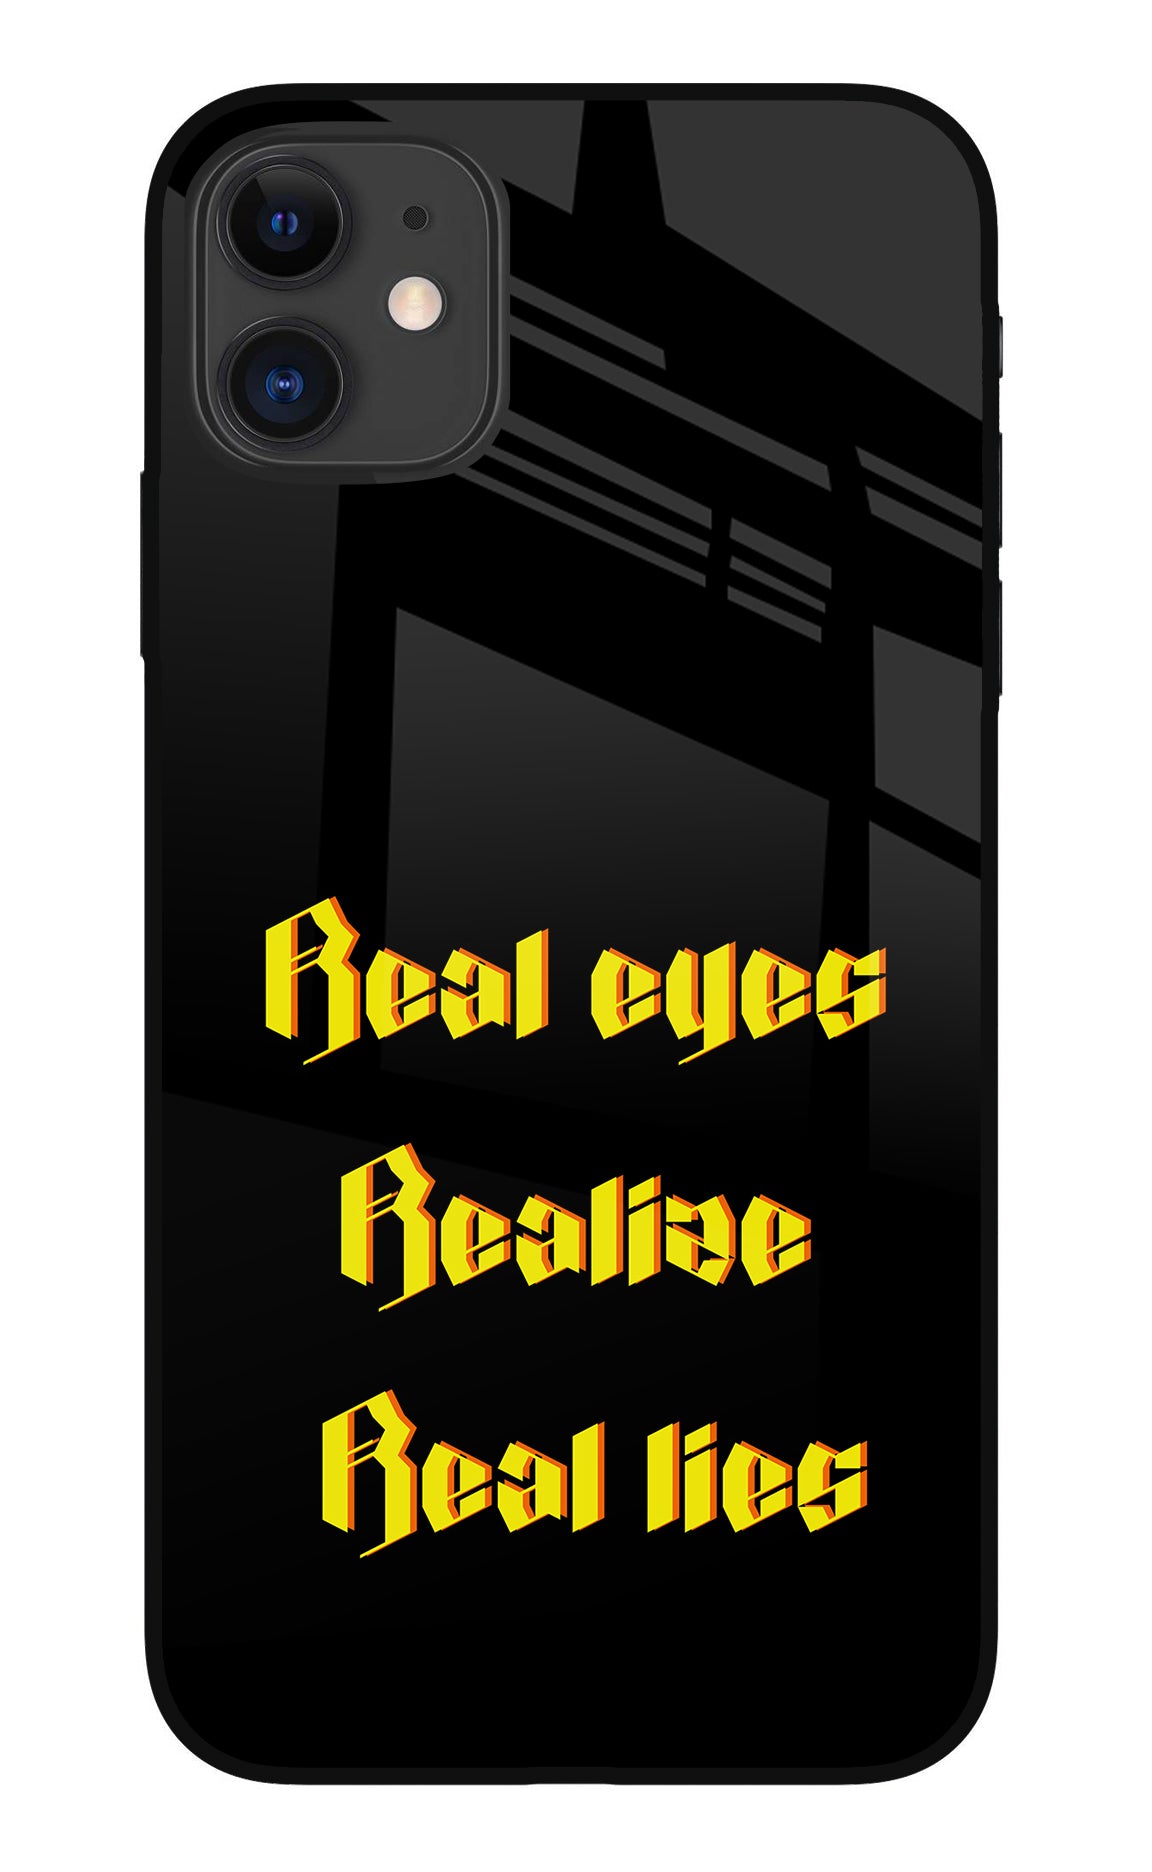 Real Eyes Realize Real Lies iPhone 11 Back Cover